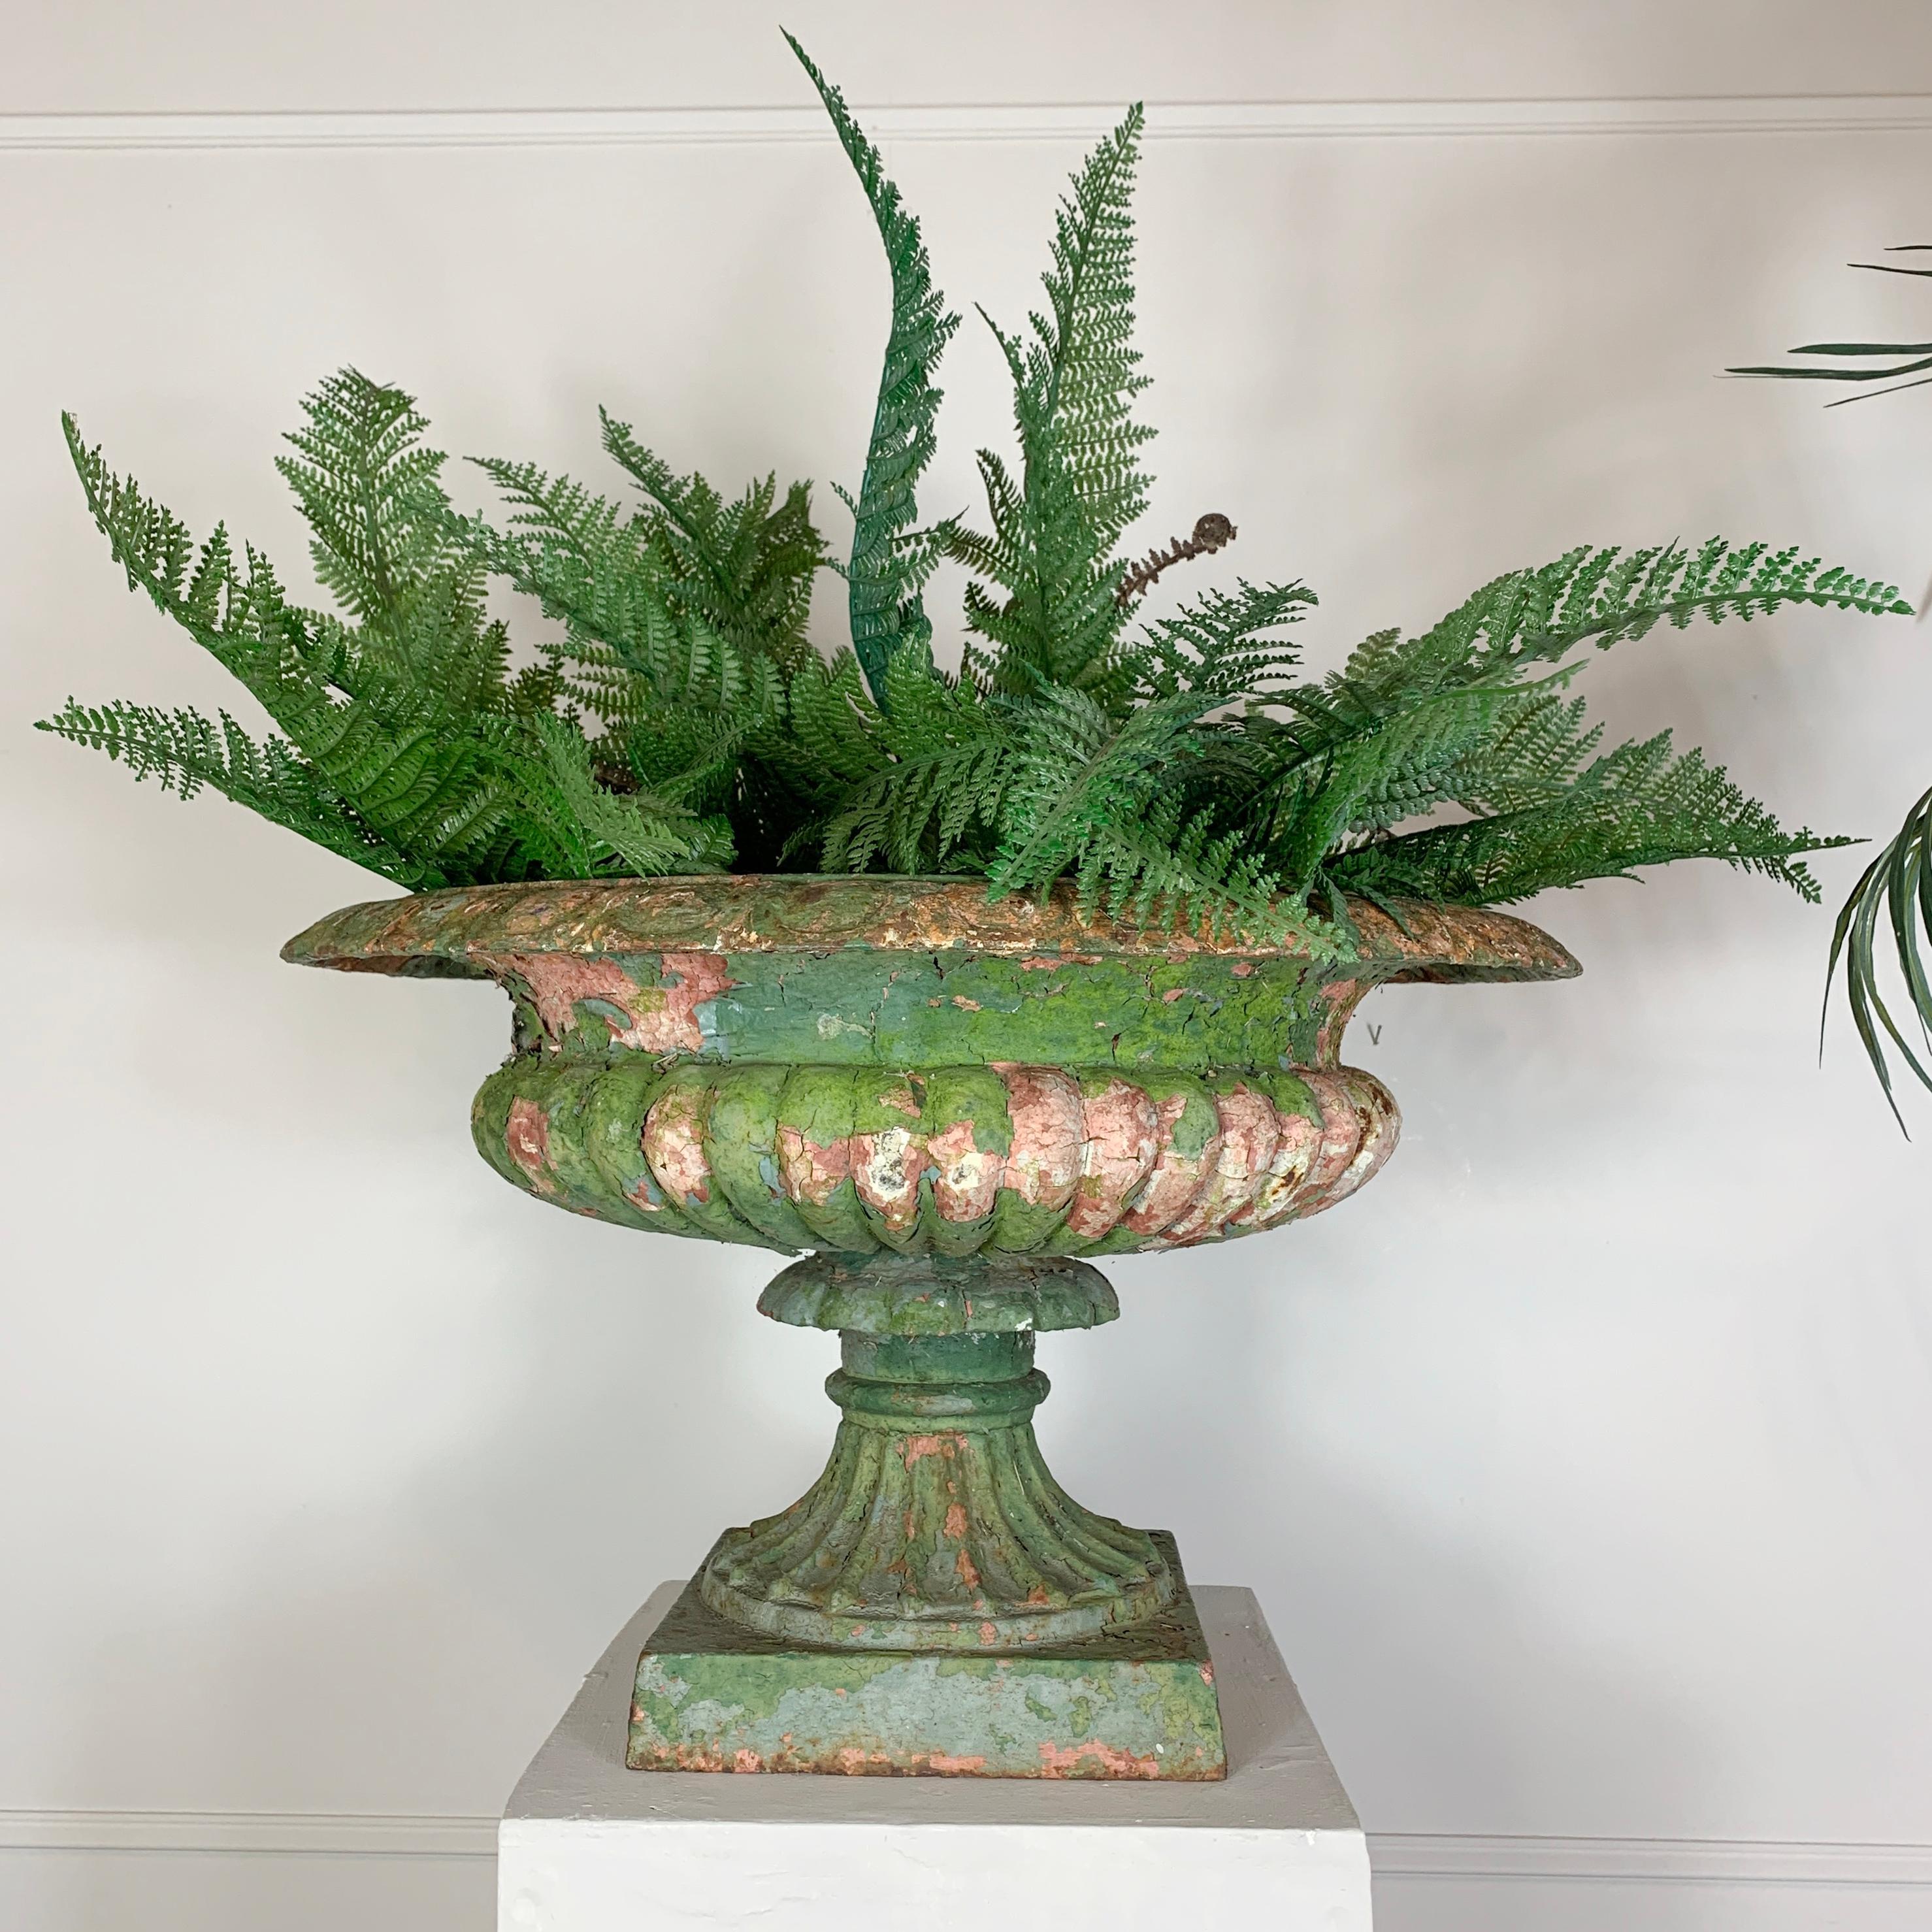 A quite exceptional Georgian 'Tazza' Urn, in superb original condition, layers of two centuries of paint and moss give the Urn the most fantastic colour and patina. Dating to circa 1810, this is a wonderfully proportioned piece of very usable